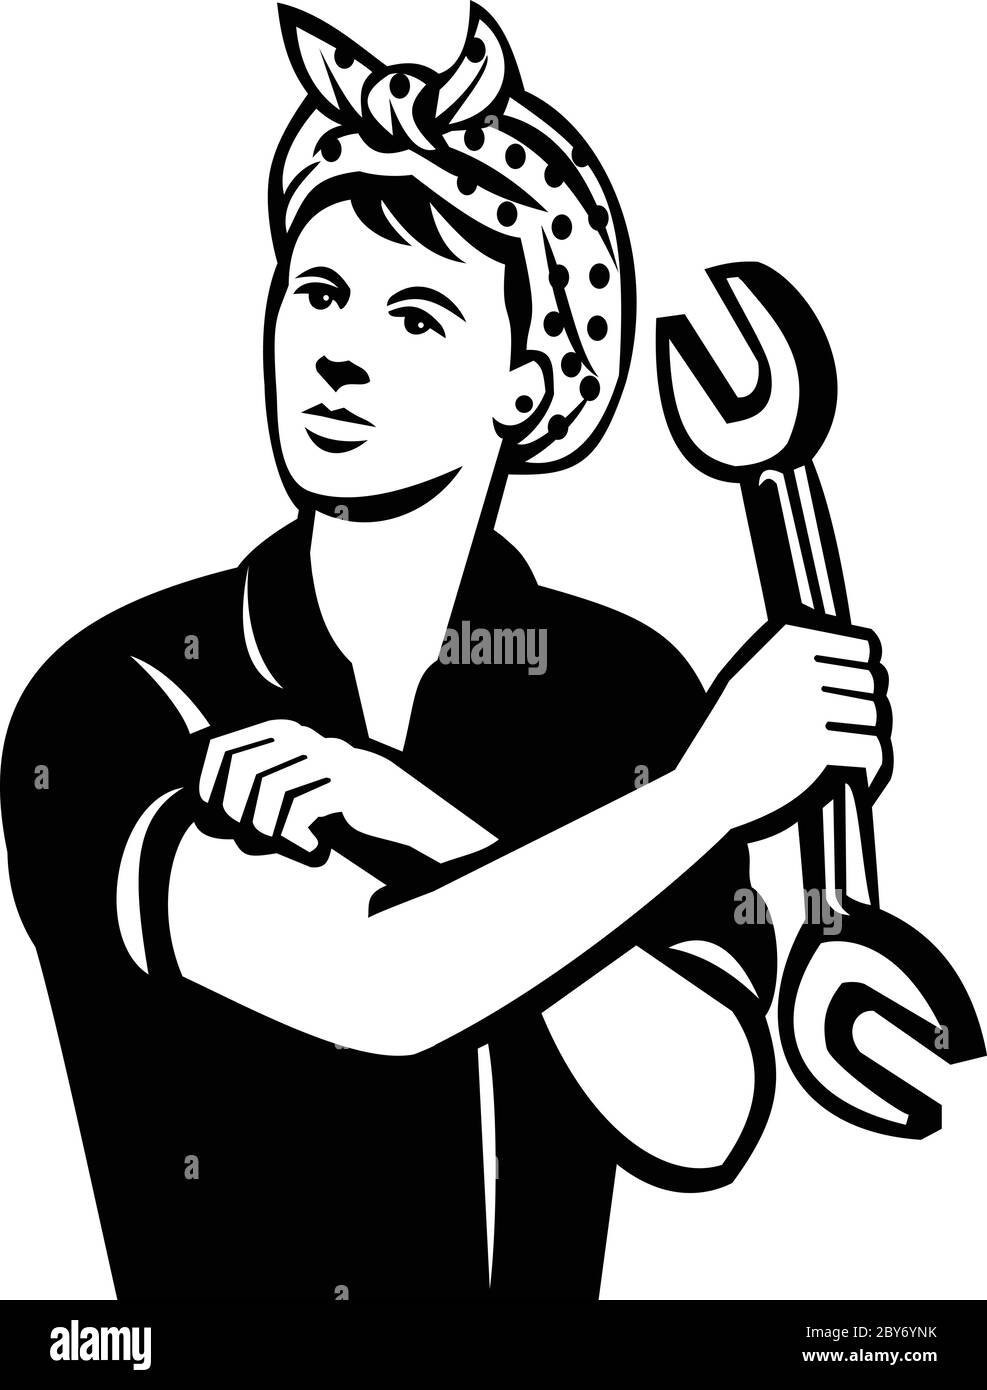 Illustration of a female mechanic holding a spanner wrench flexing her arm muscle viewed from front done in retro black and white style. Stock Vector